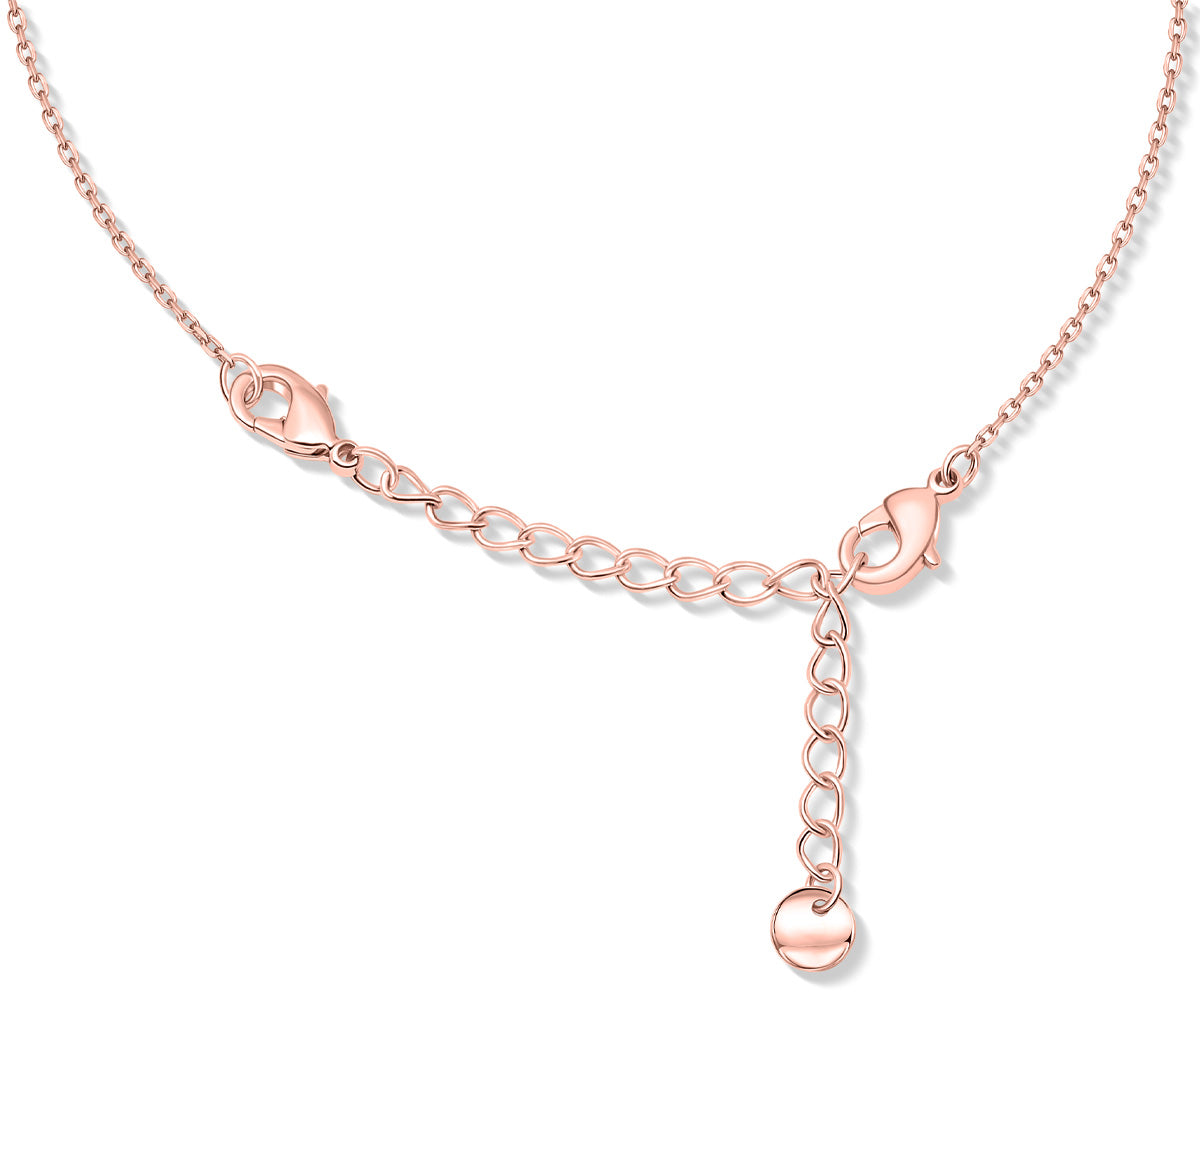 Rose gold plated chain extender for necklace